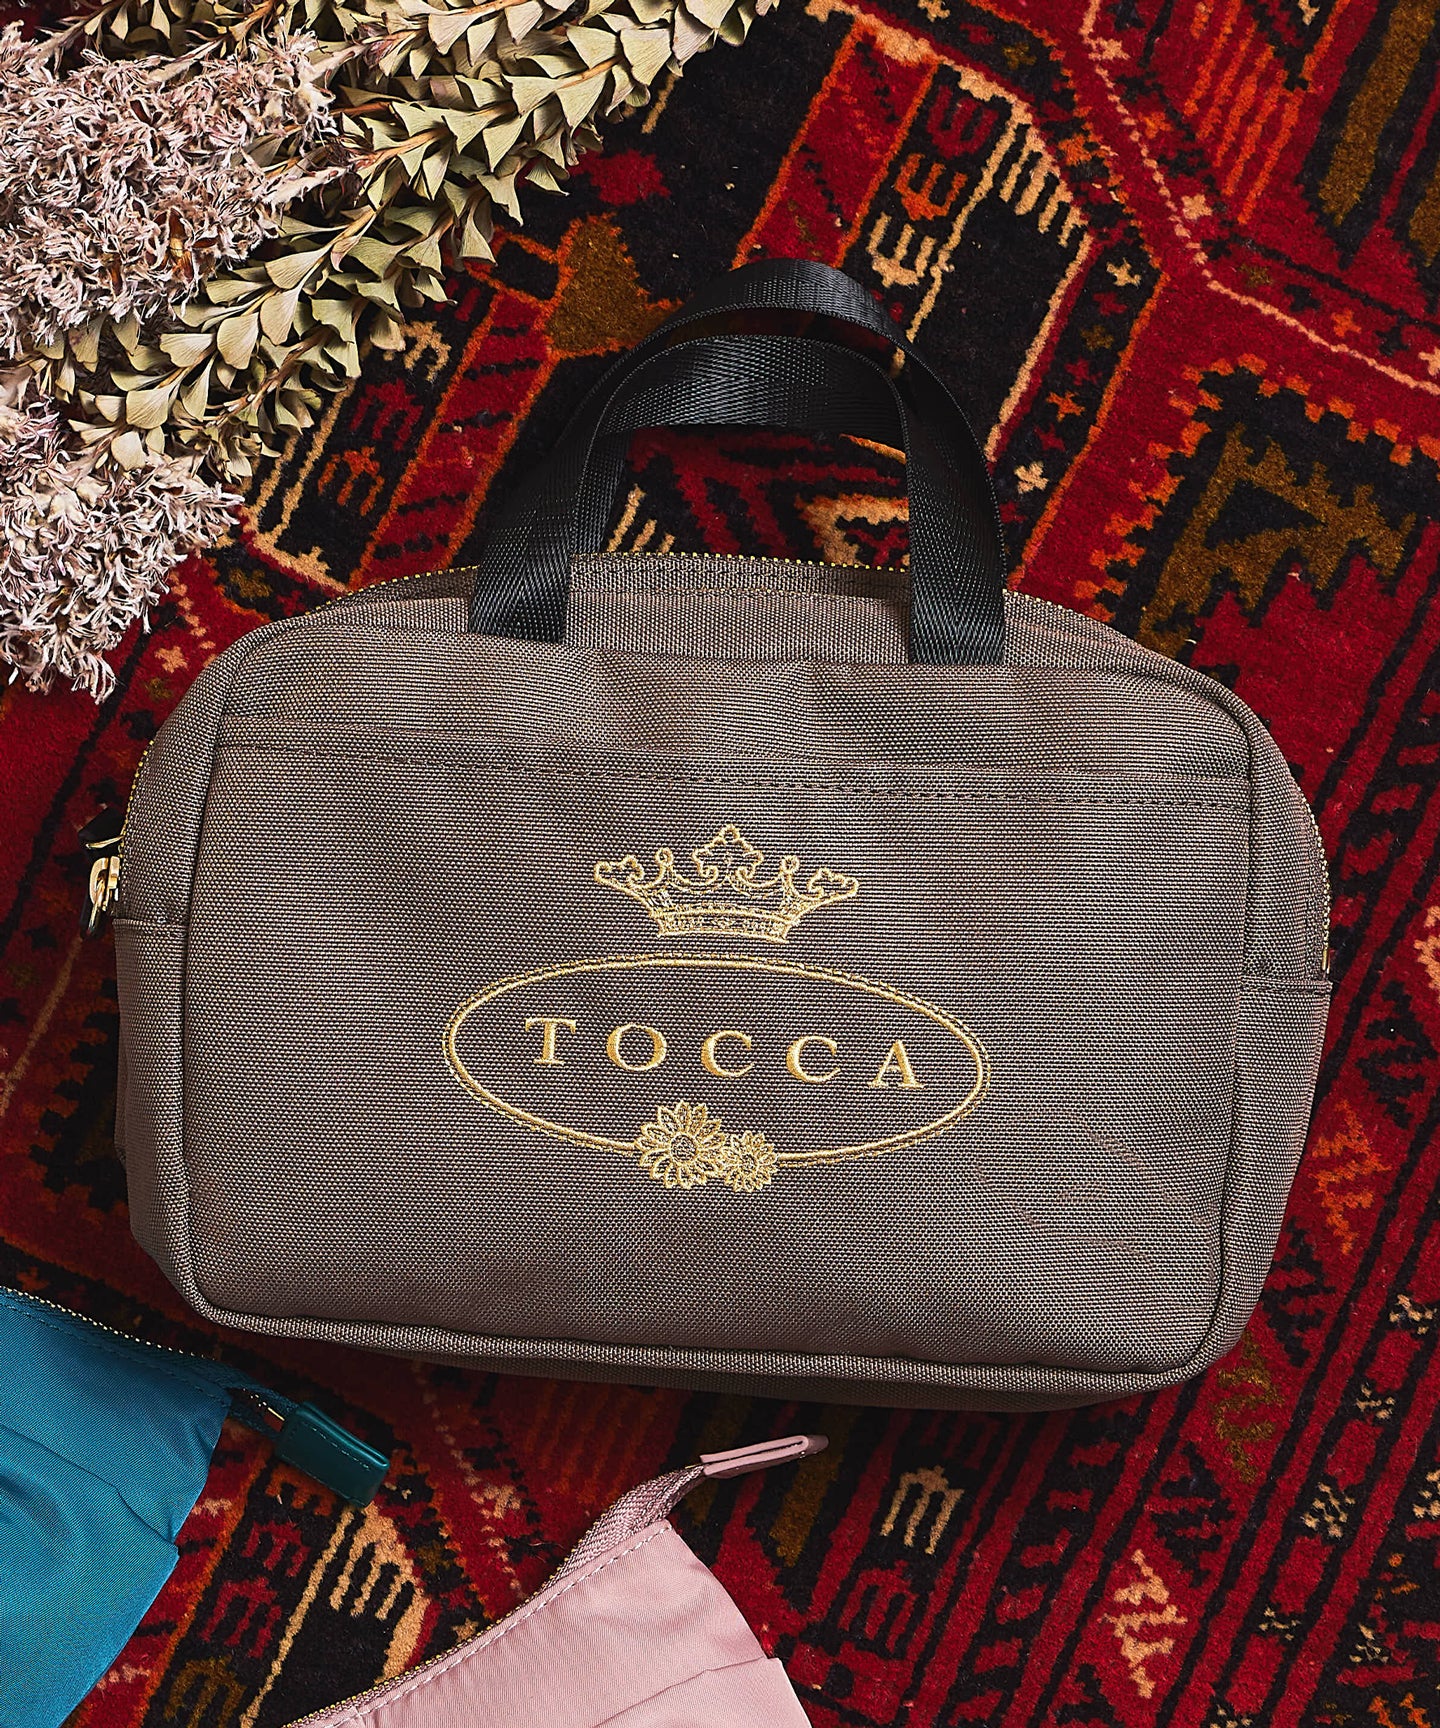 TOCCA LOGO BAG IN POUCH – TOCCA OFFICIAL SITE